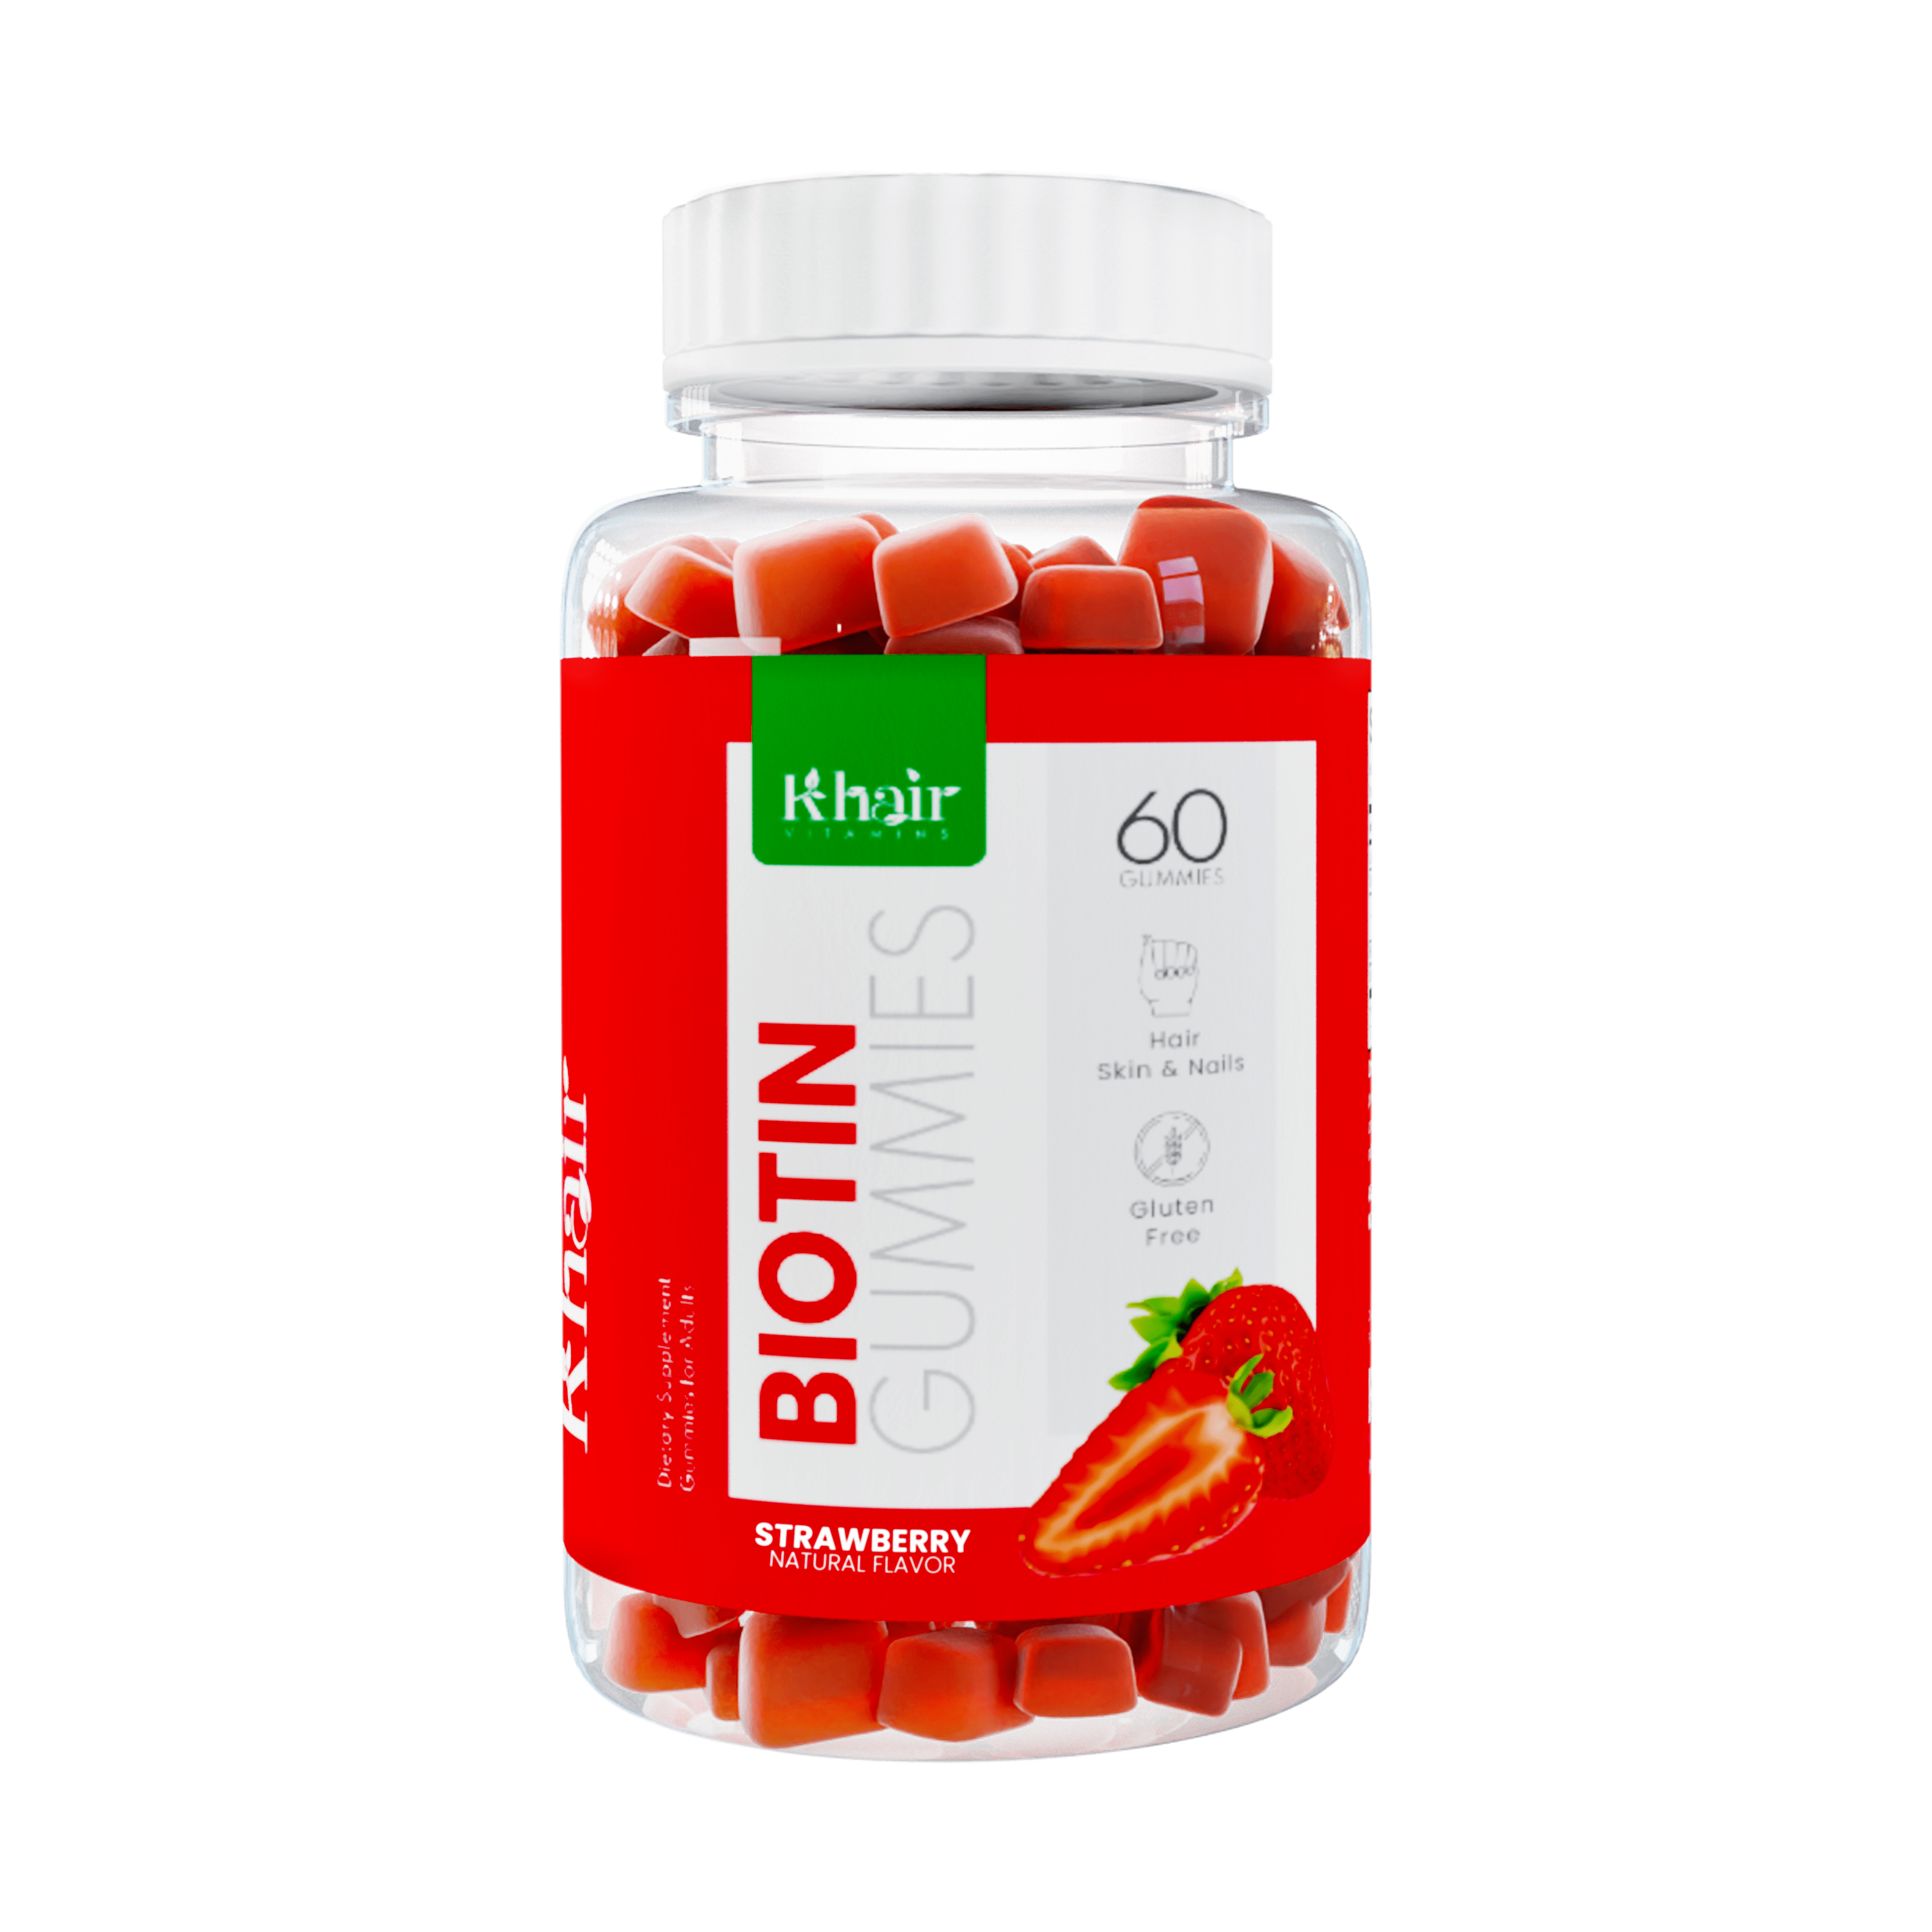 Biotin Gummies: A bottle of chewable supplements containing biotin, a vitamin that promotes healthy hair, skin, and nails.